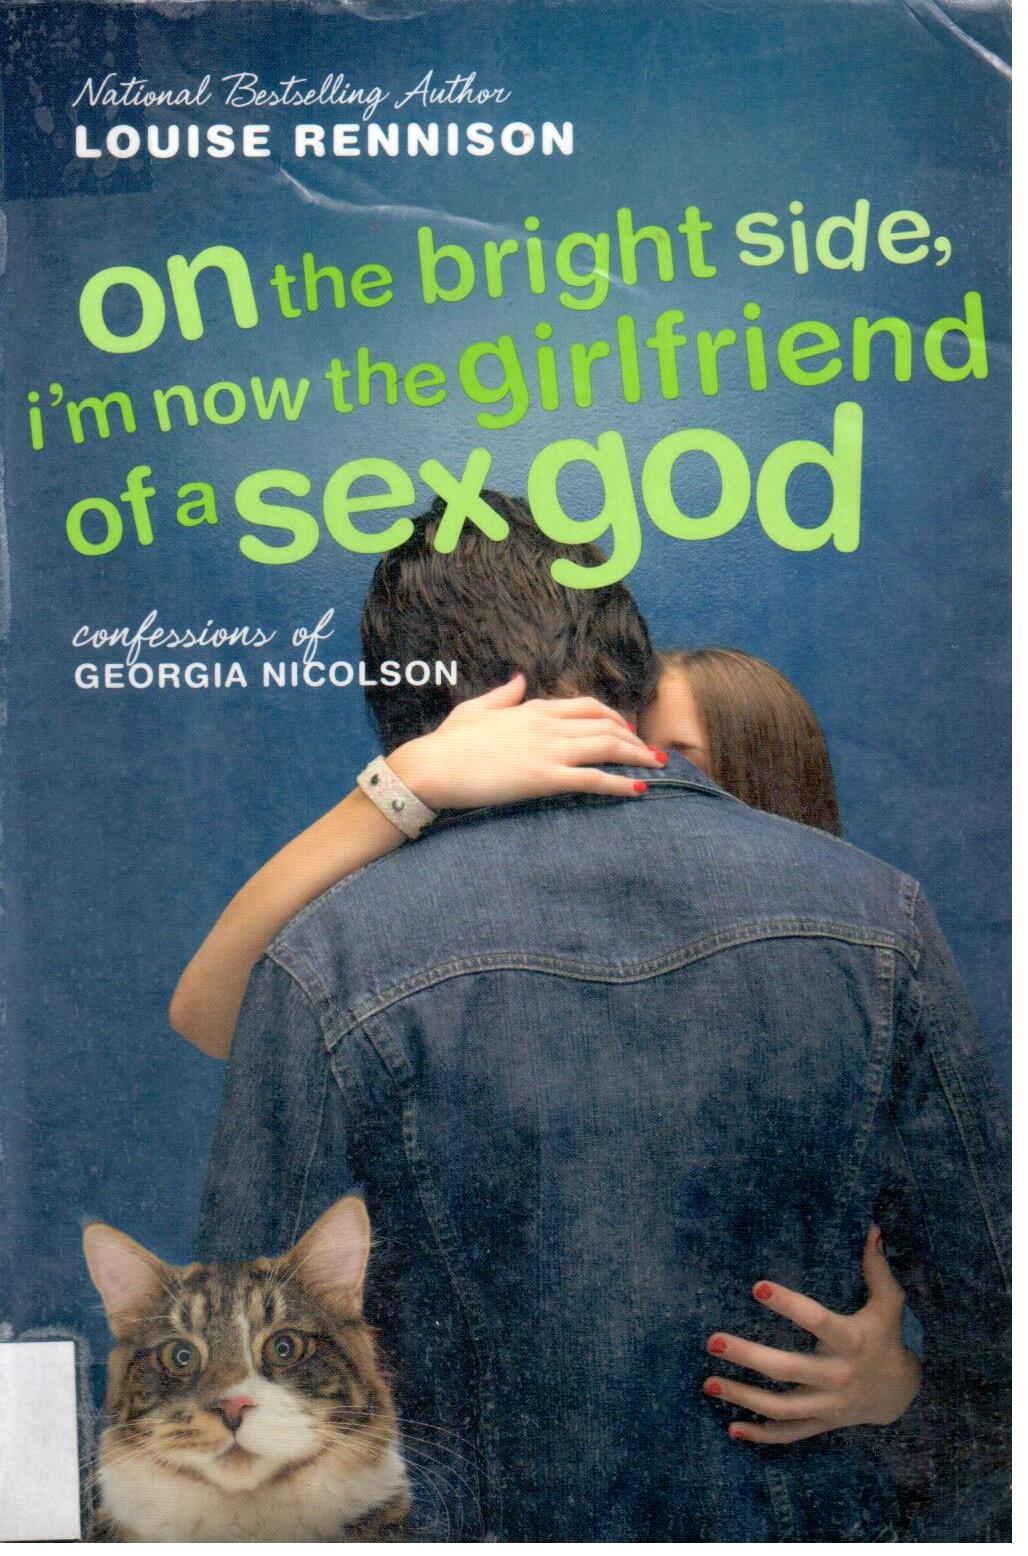 On the bright side, I'm now the girlfriend of a sex god